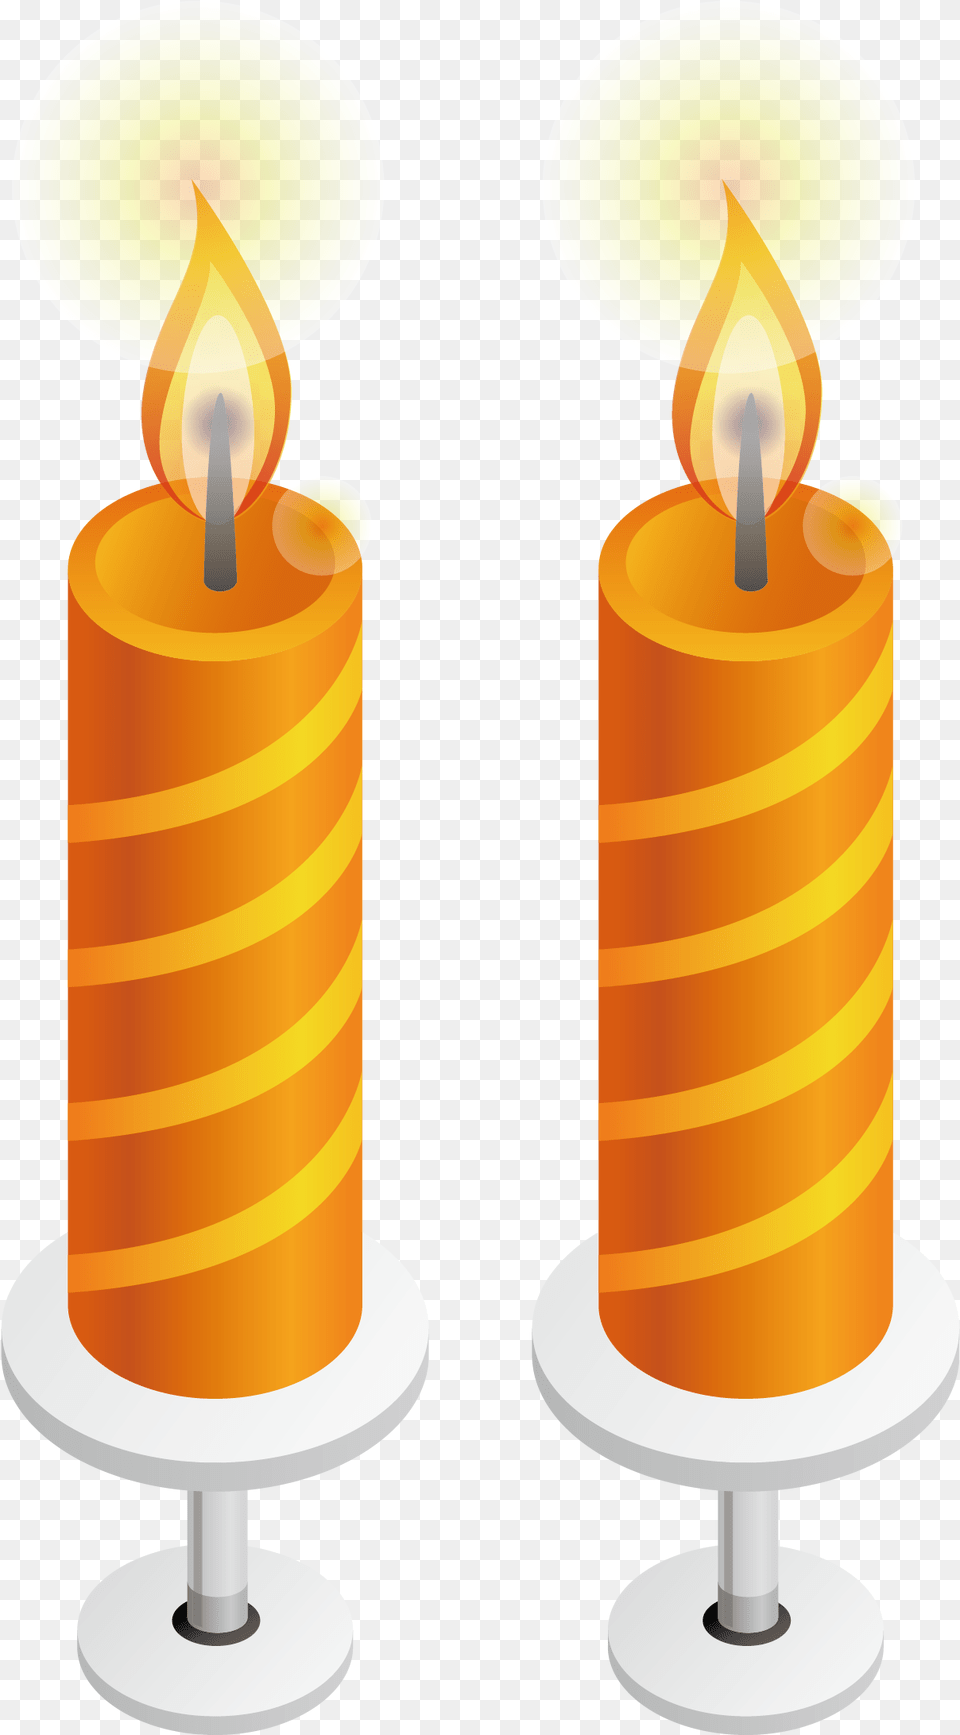 Candle Flame Candle Vector Element Download 1207 Christmas, Dynamite, Weapon Free Transparent Png